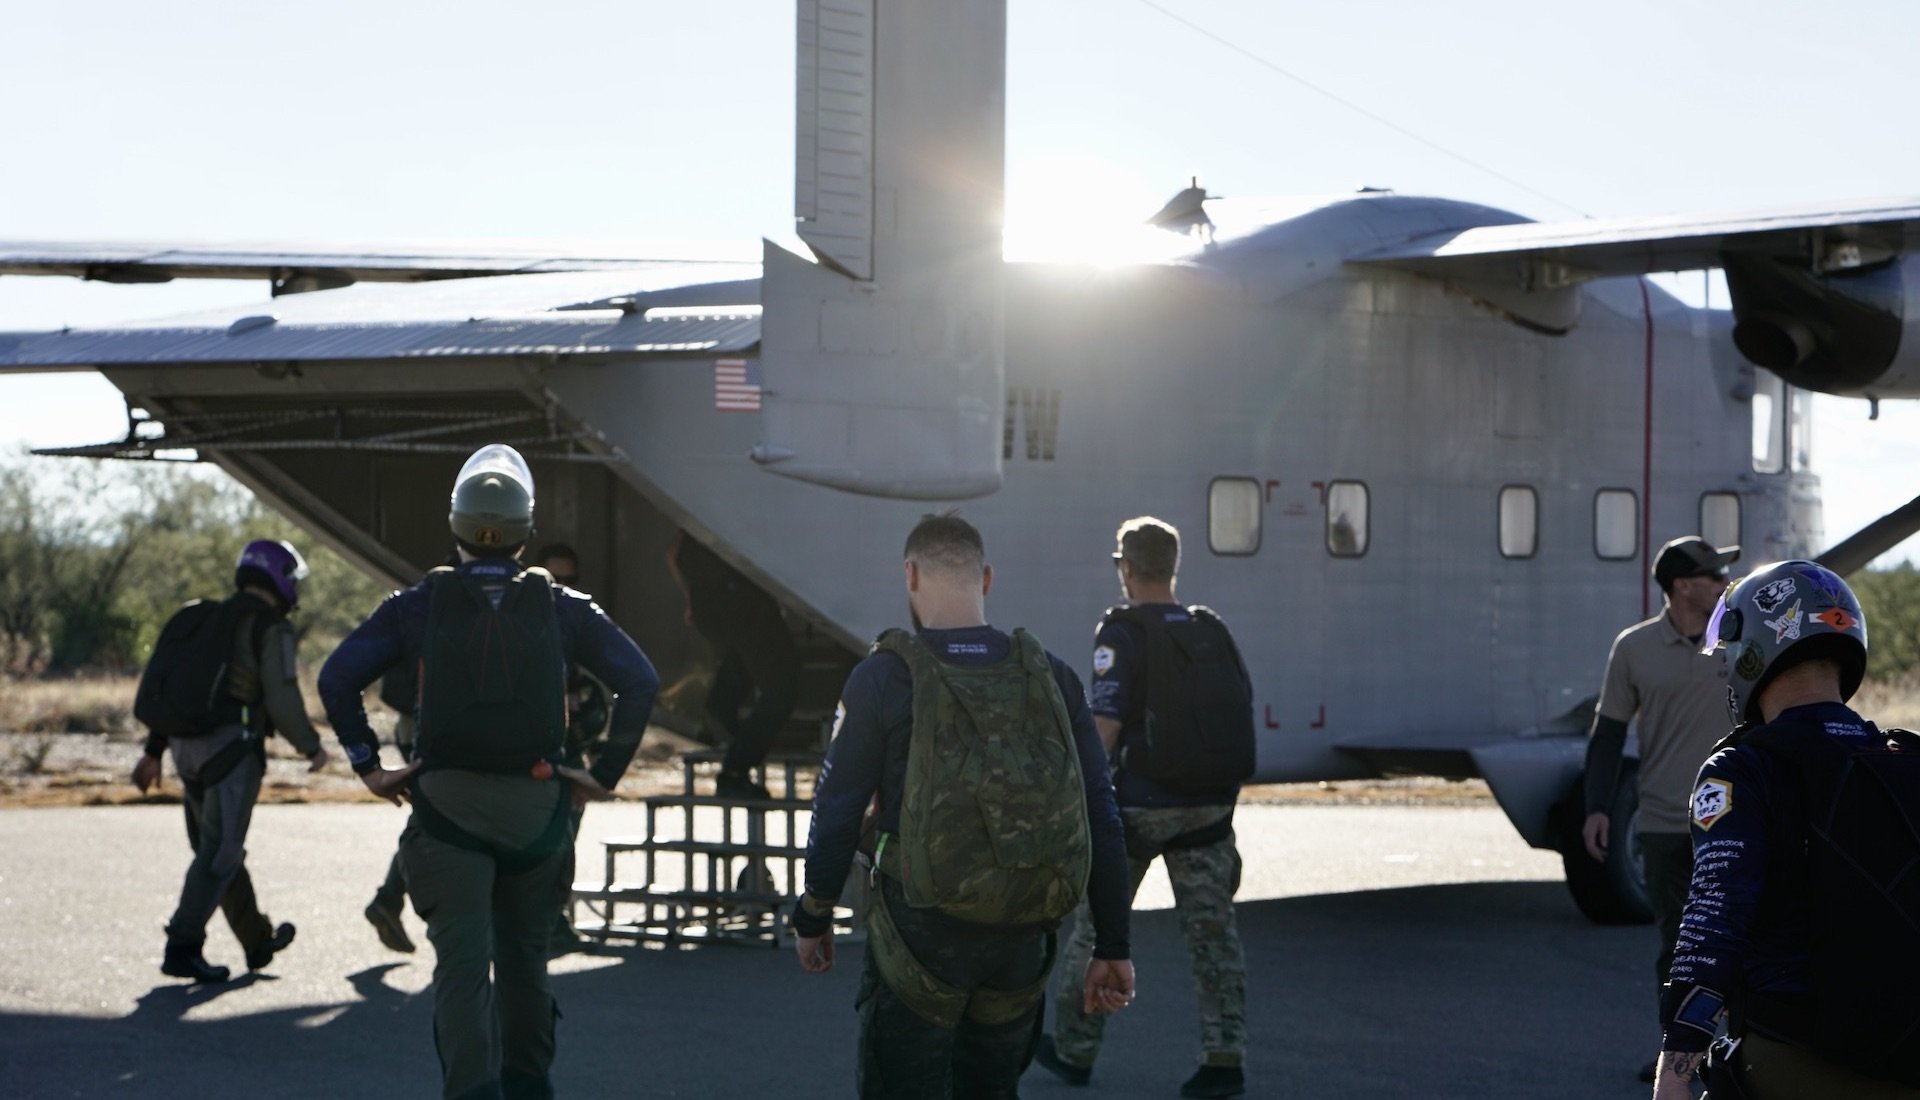 The Triple 7 Expedition team loads onto an airplane at Complete Parachute Solutions in Coolidge, Arizona, in December 2022. Legacy Expeditions photo.